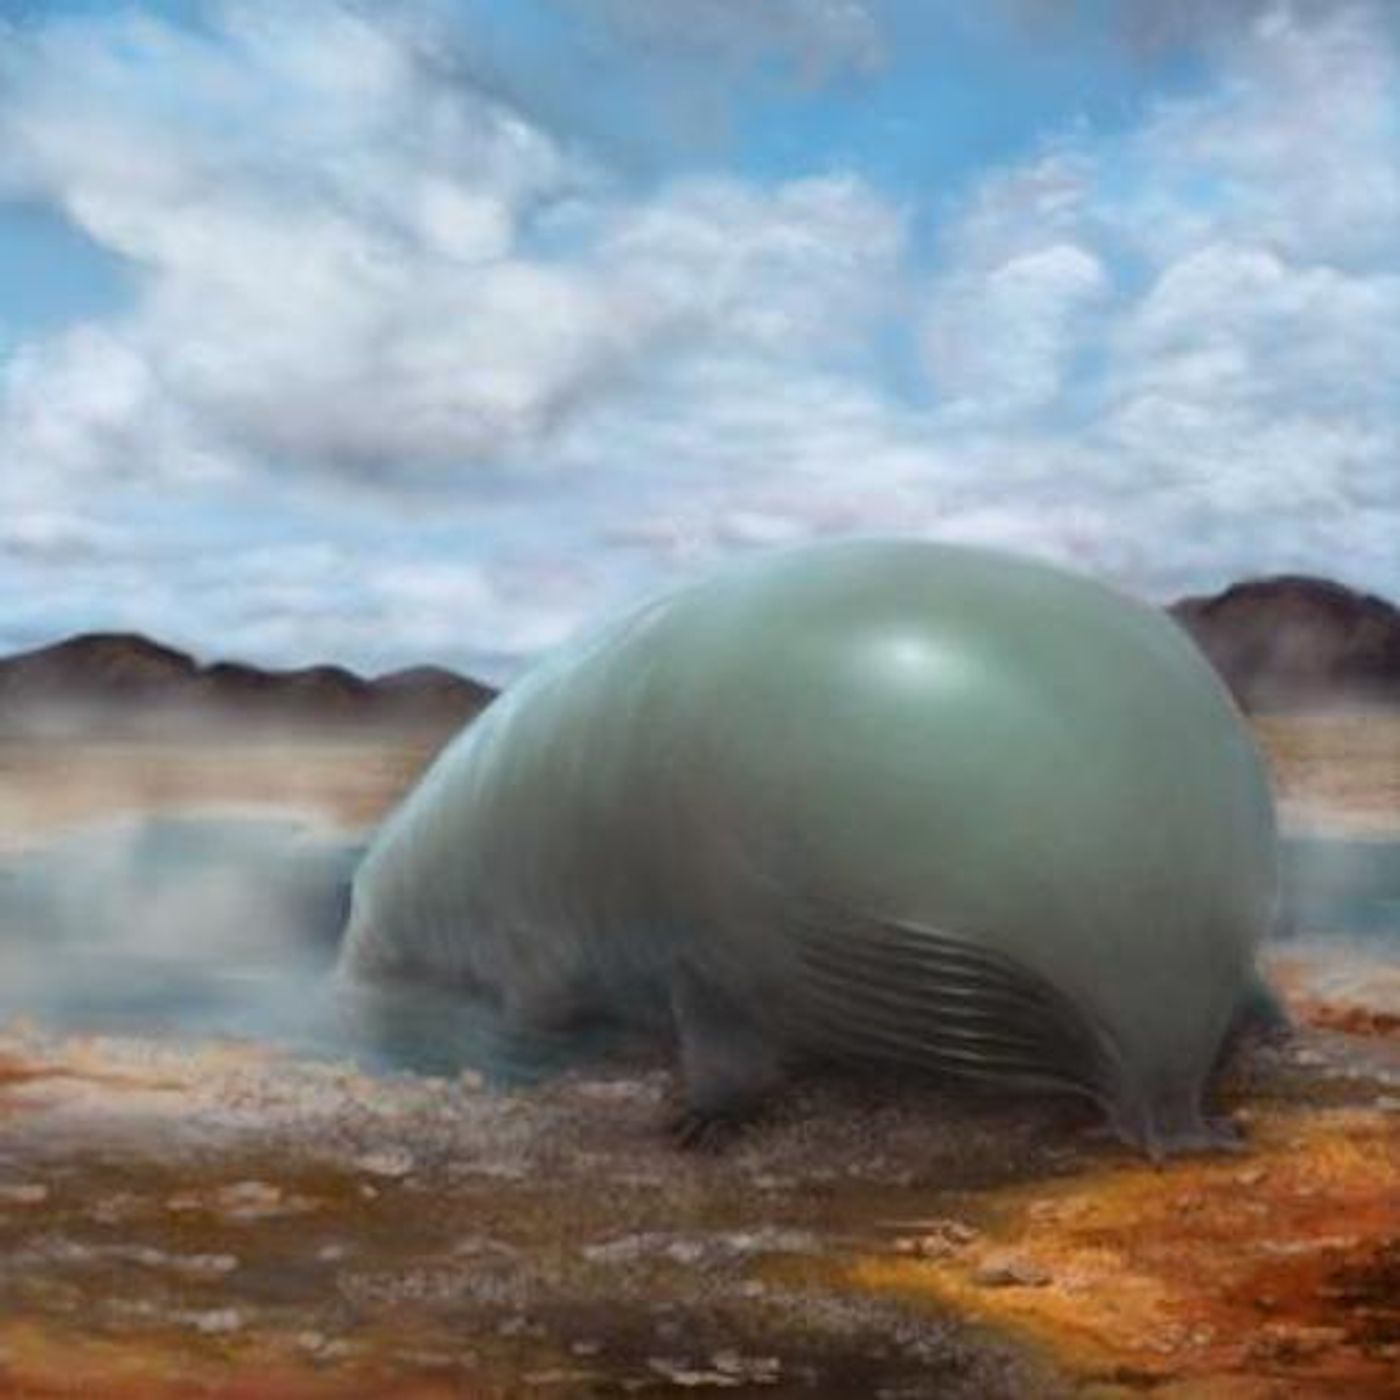 An artist's rendering of organosilicon-based life. Organosilicon compounds have carbon-silicon bonds. Research from Frances Arnold's lab at Caltech showed that bacteria can make organosilicon compounds. This doesn't prove that silicon- or organosilicon-based life is possible, but shows that life could be persuaded to incorporate silicon into its basic components. / Credit: Lei Chen and Yan Liang (BeautyOfScience.com) for Caltech